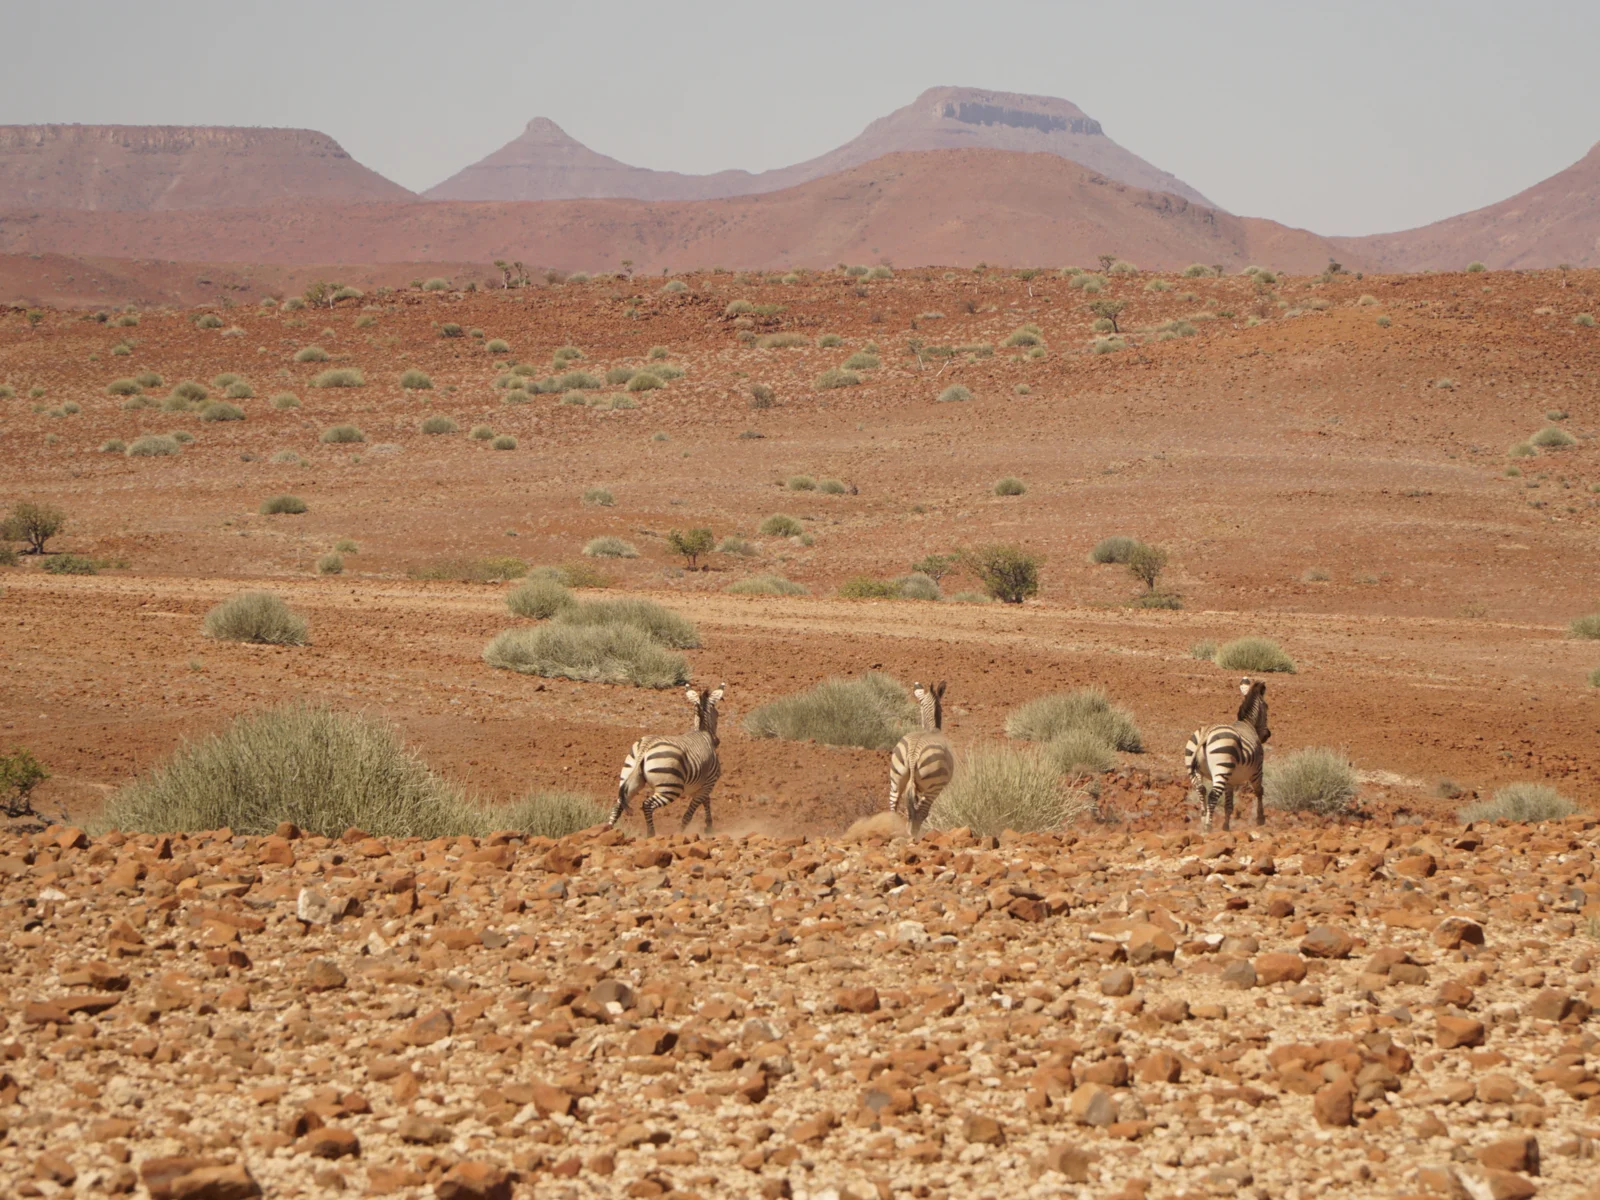 Mountain zebras seen in the Northern Damaraland, one of Africa's best safaris